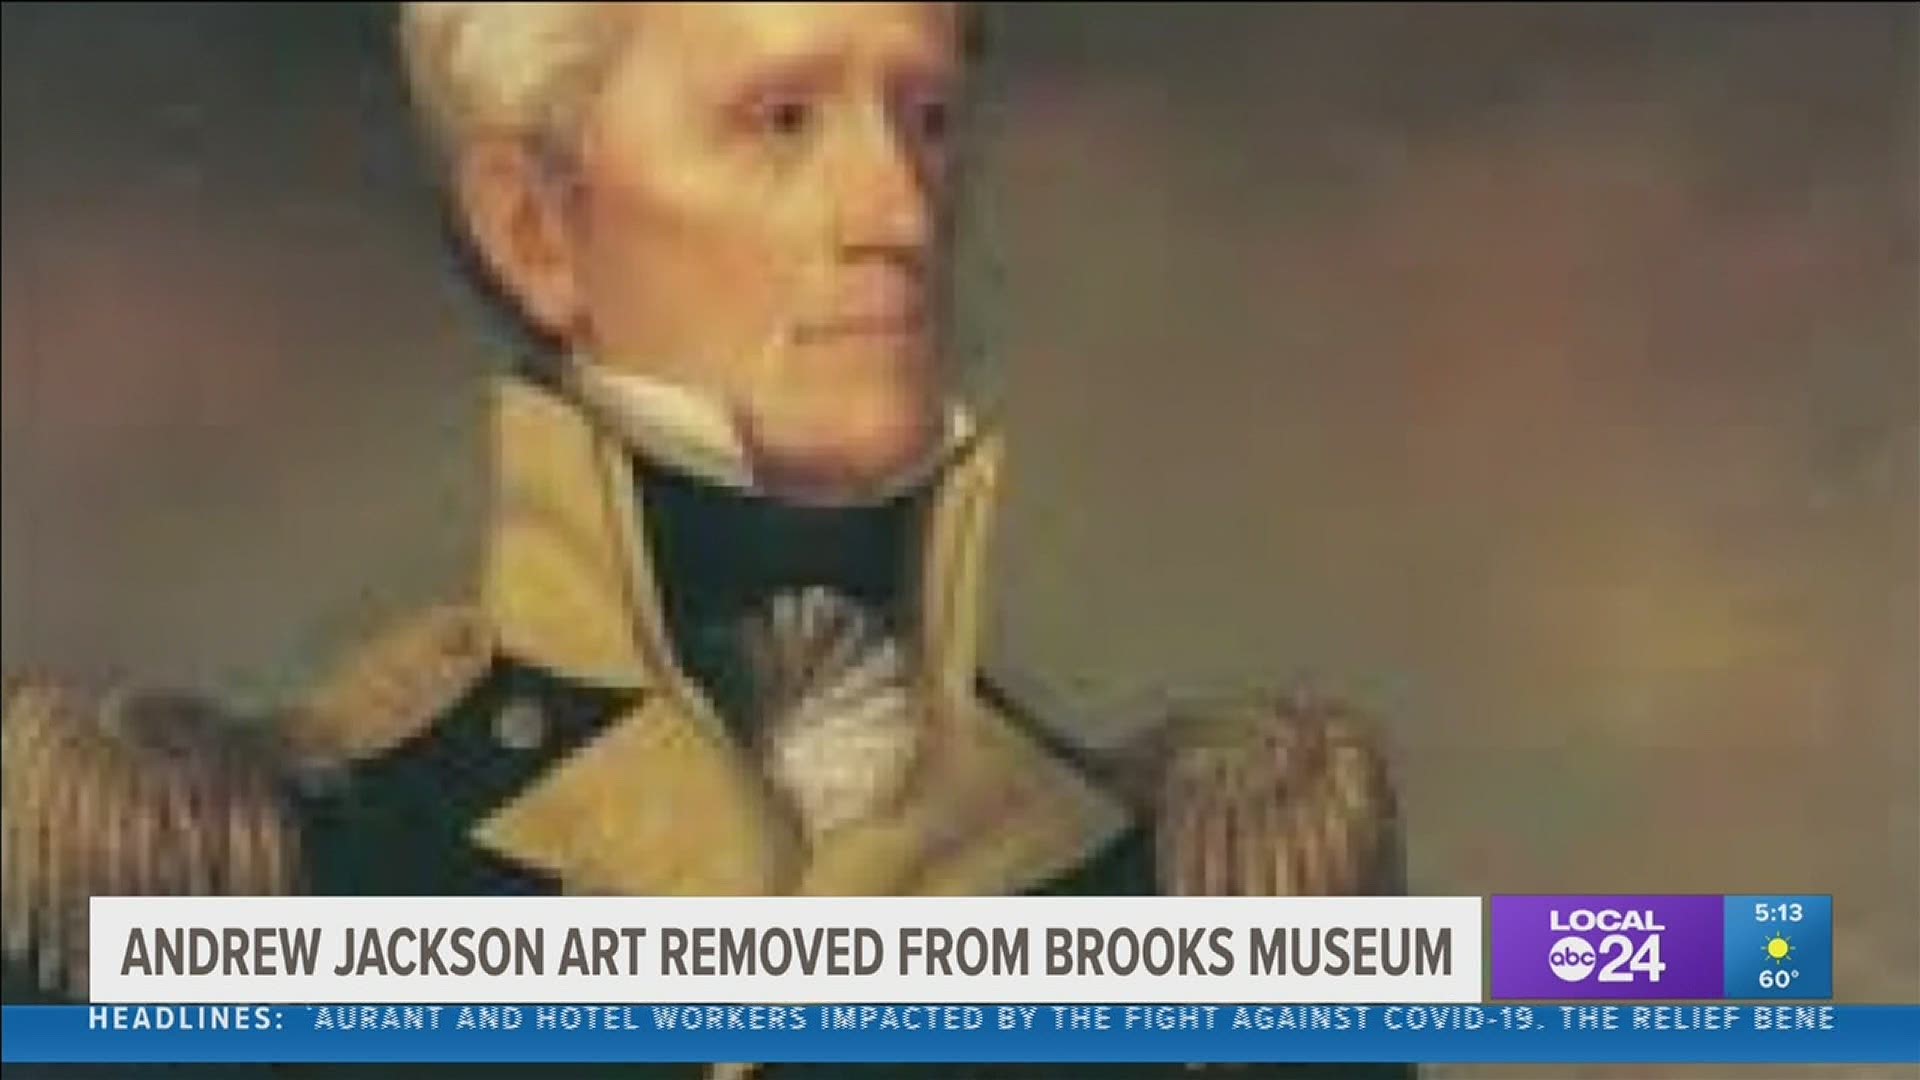 For decades, a portrait of President Andrew Jackson hung undisturbed in the Memphis Brooks Museum of Art. It's no longer on display.